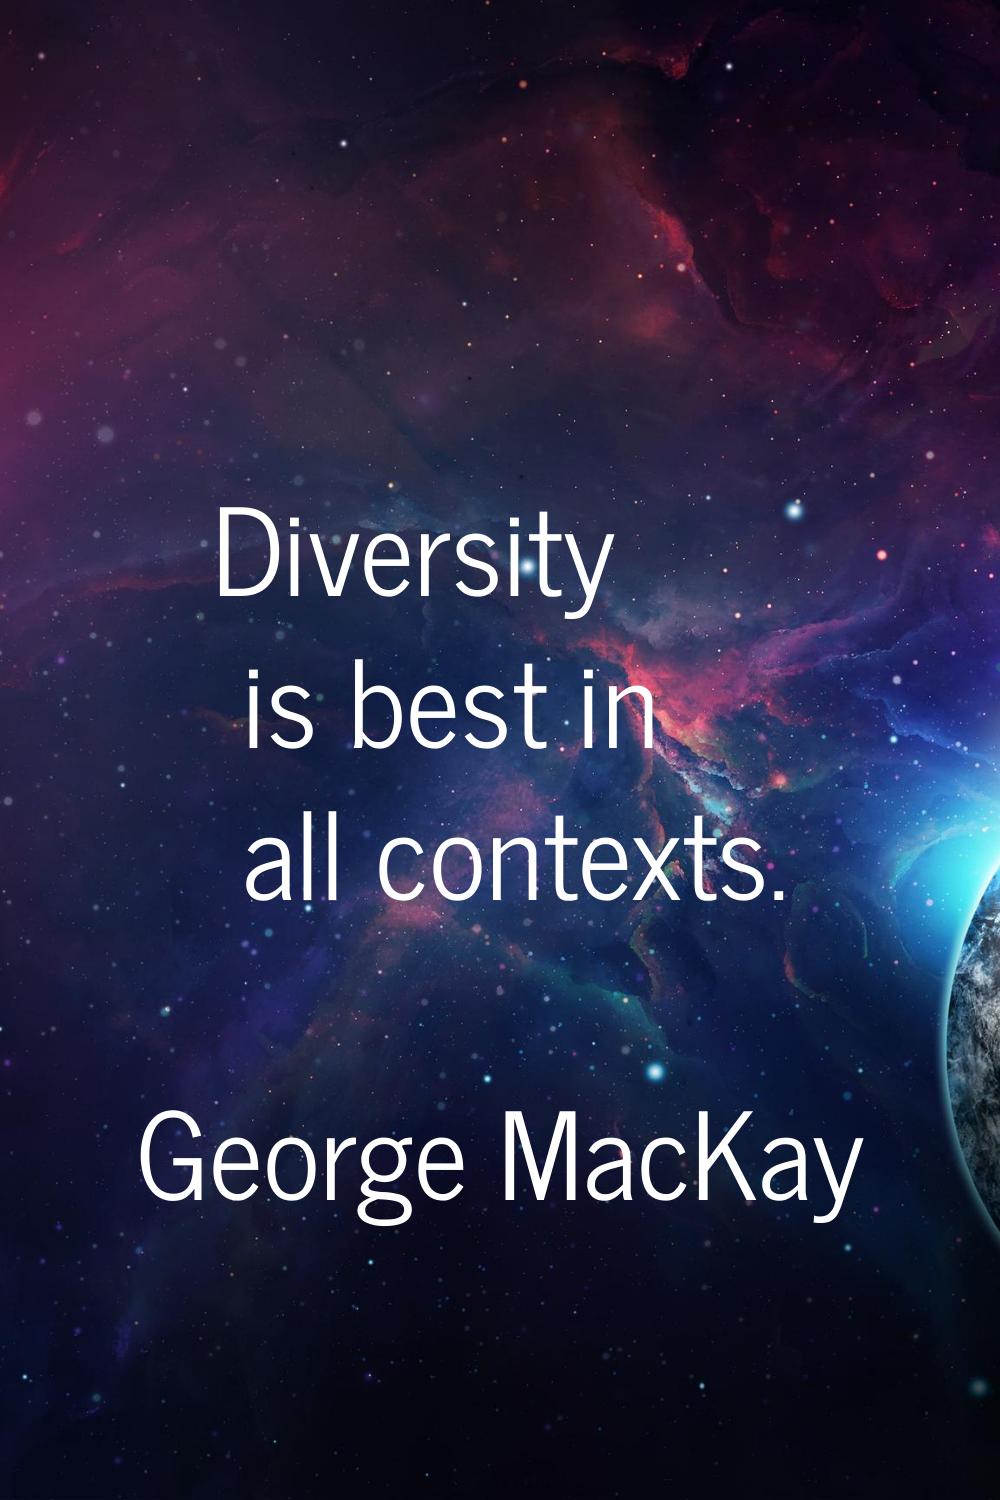 Diversity is best in all contexts.